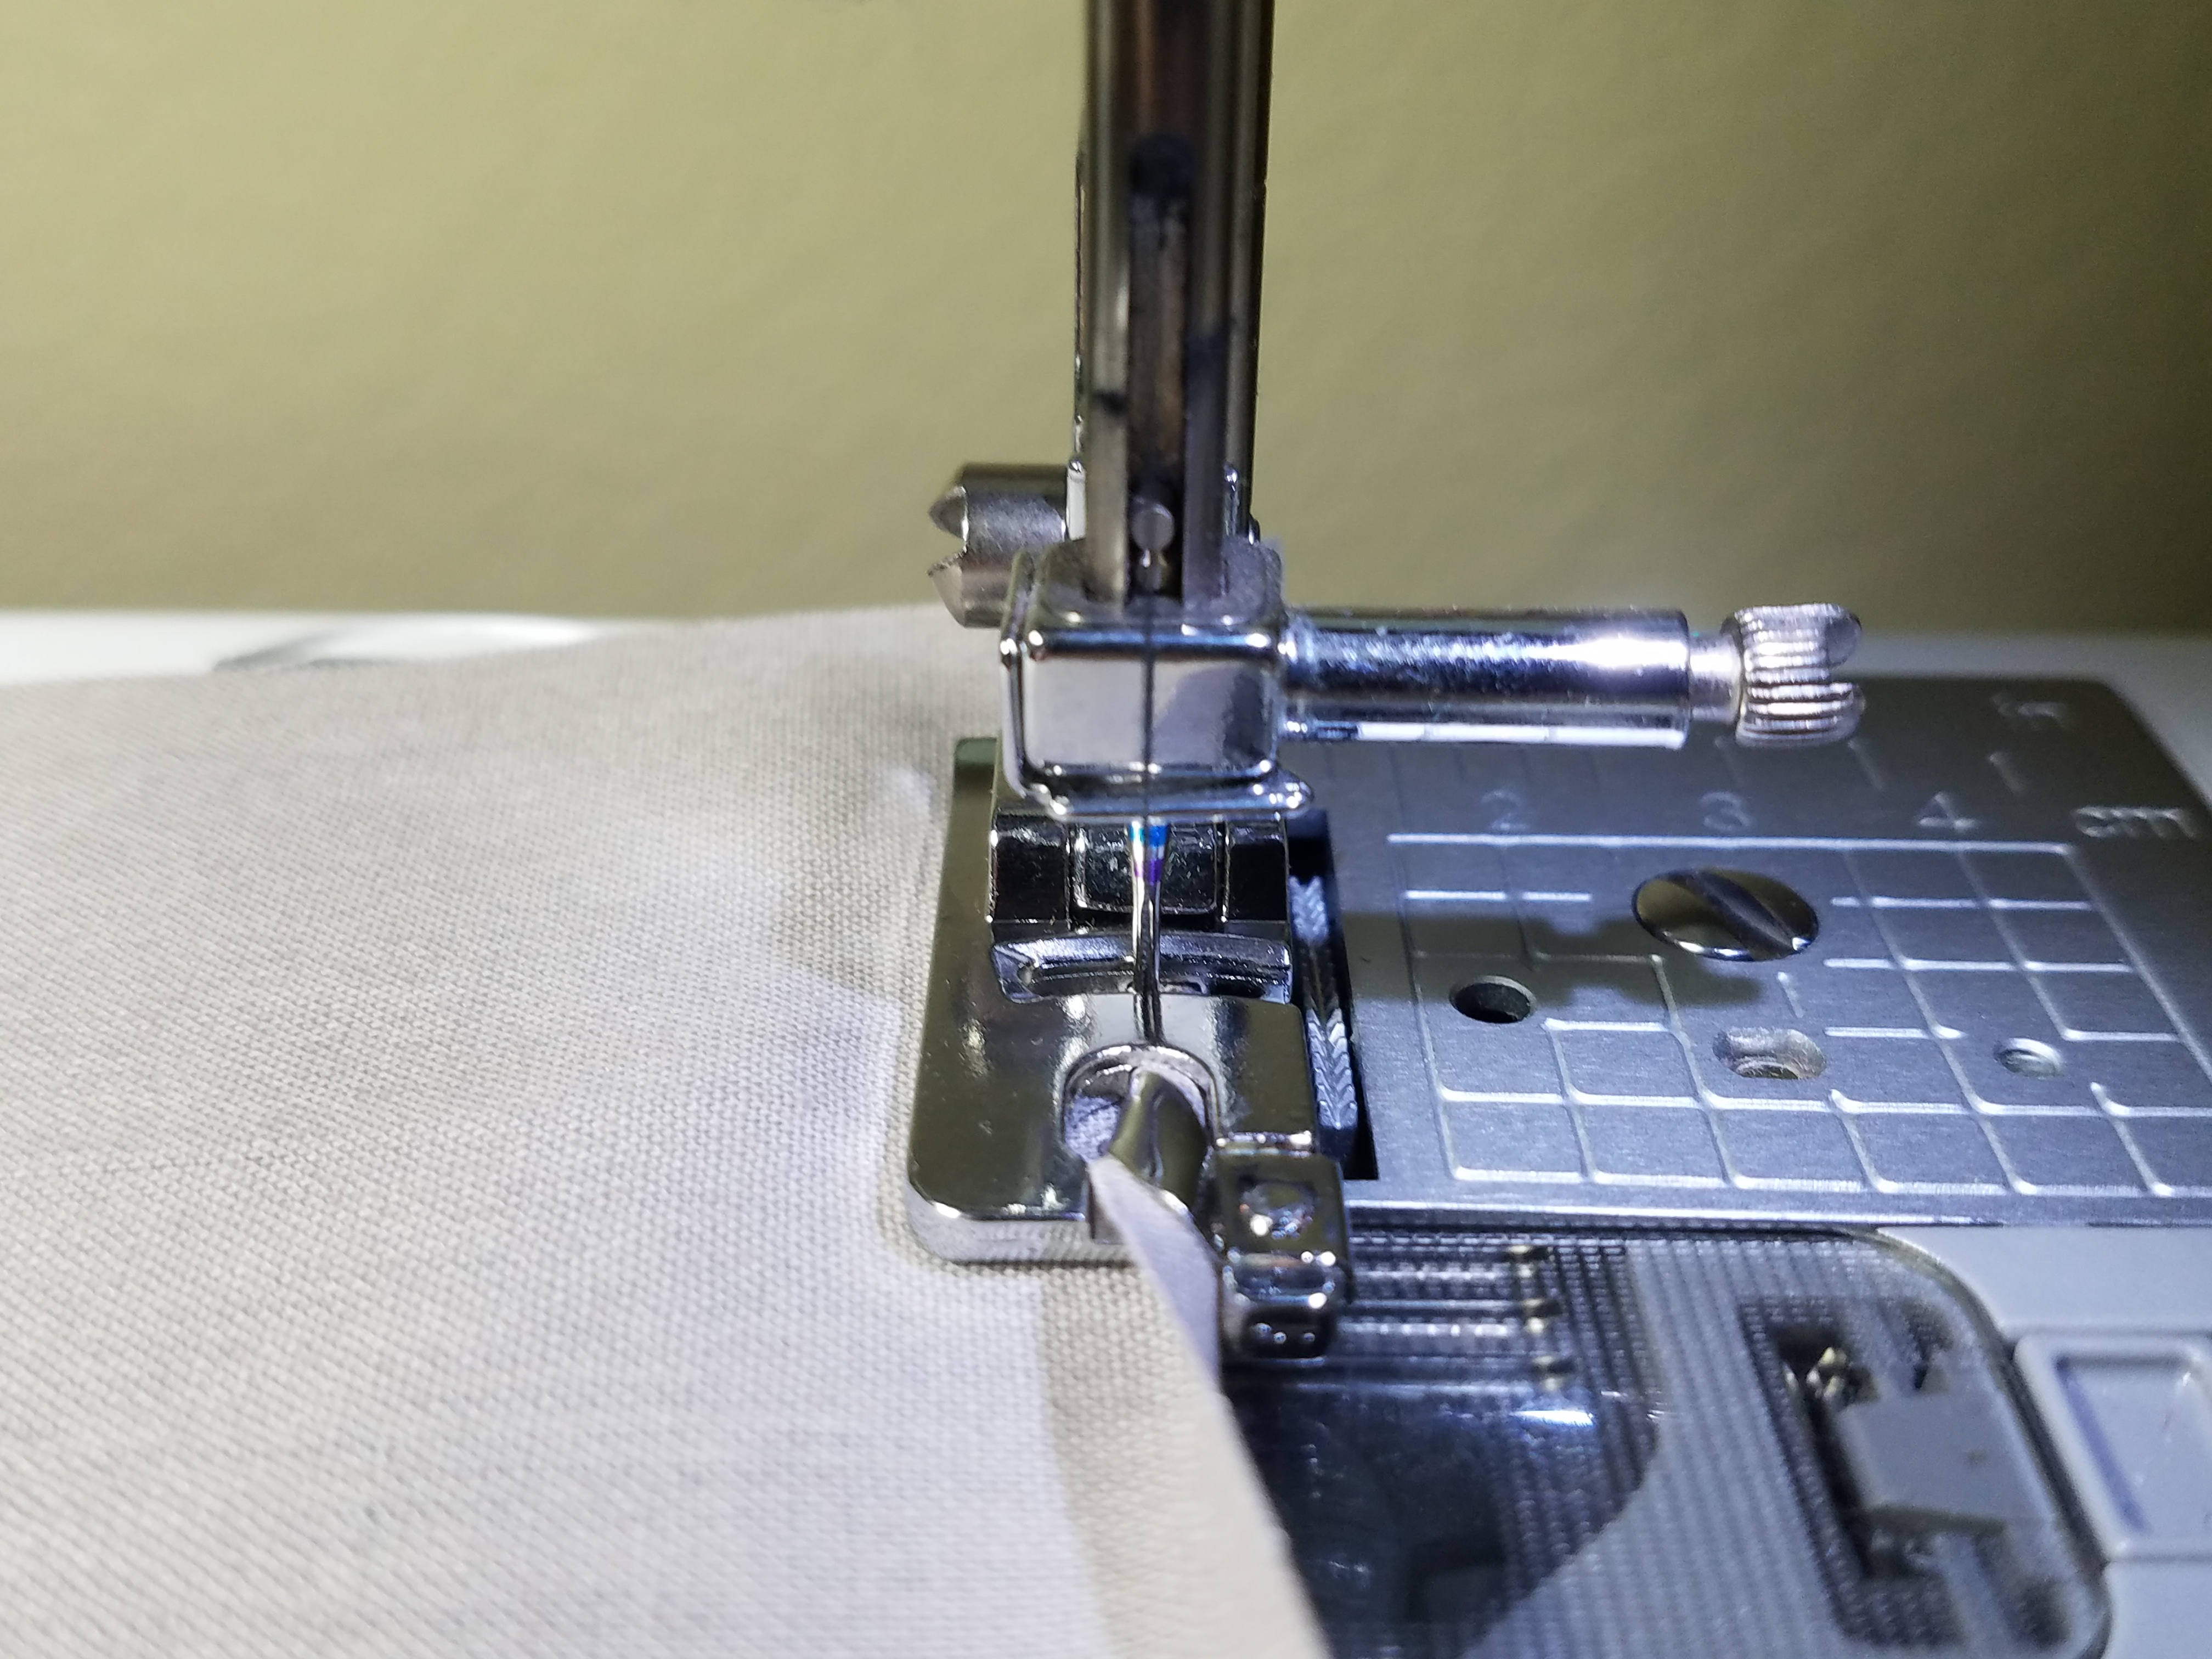 A Guide to Stabilizers with Embroidering